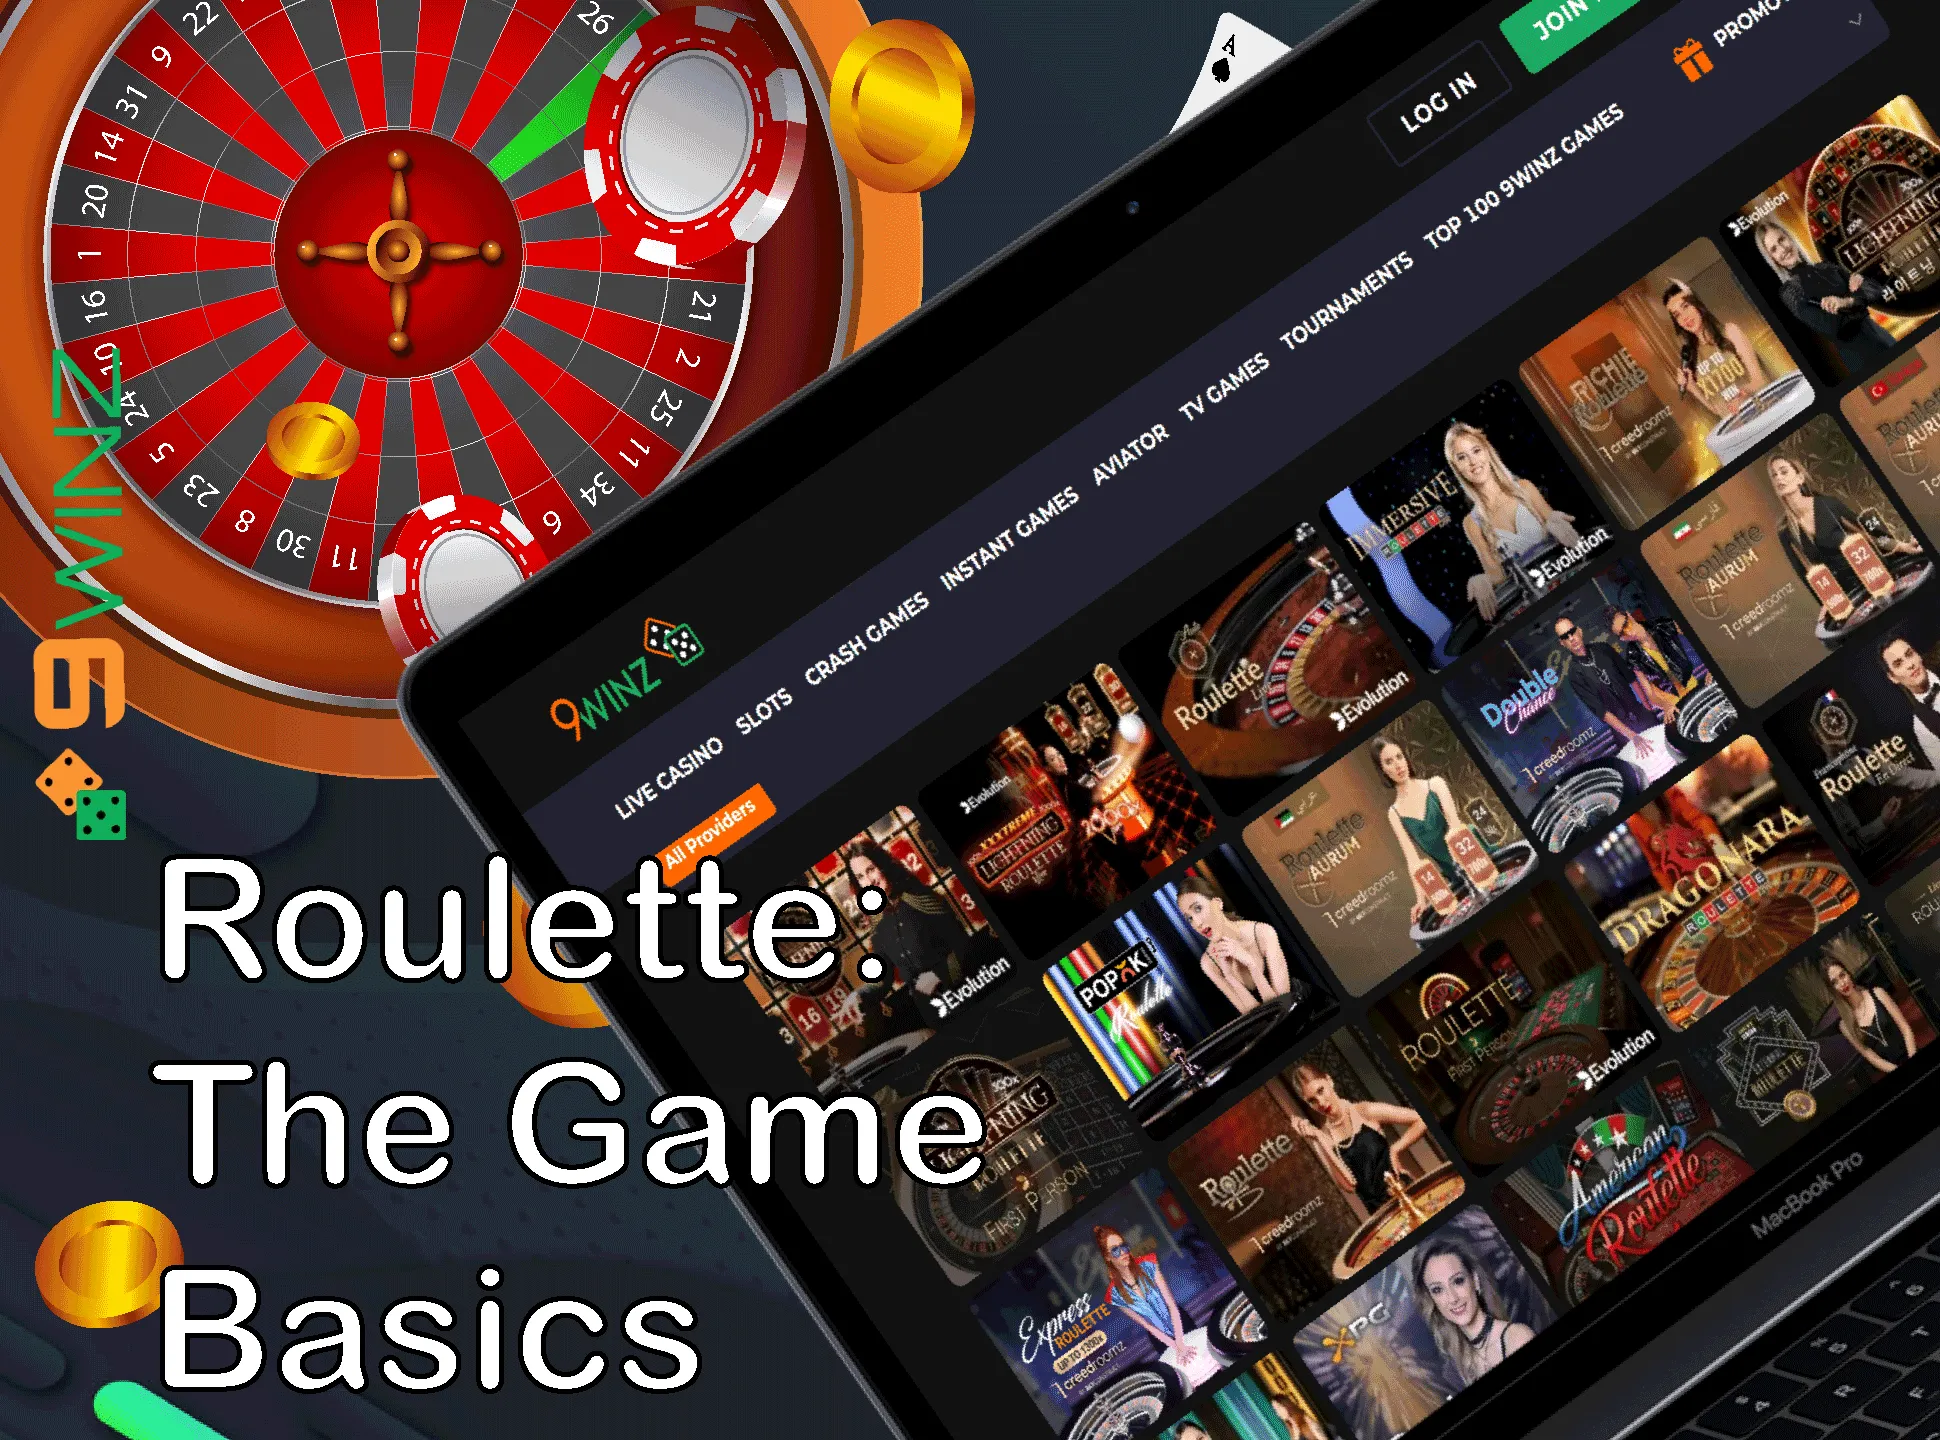 Learn basics of the 9winz roulette game by playing it.